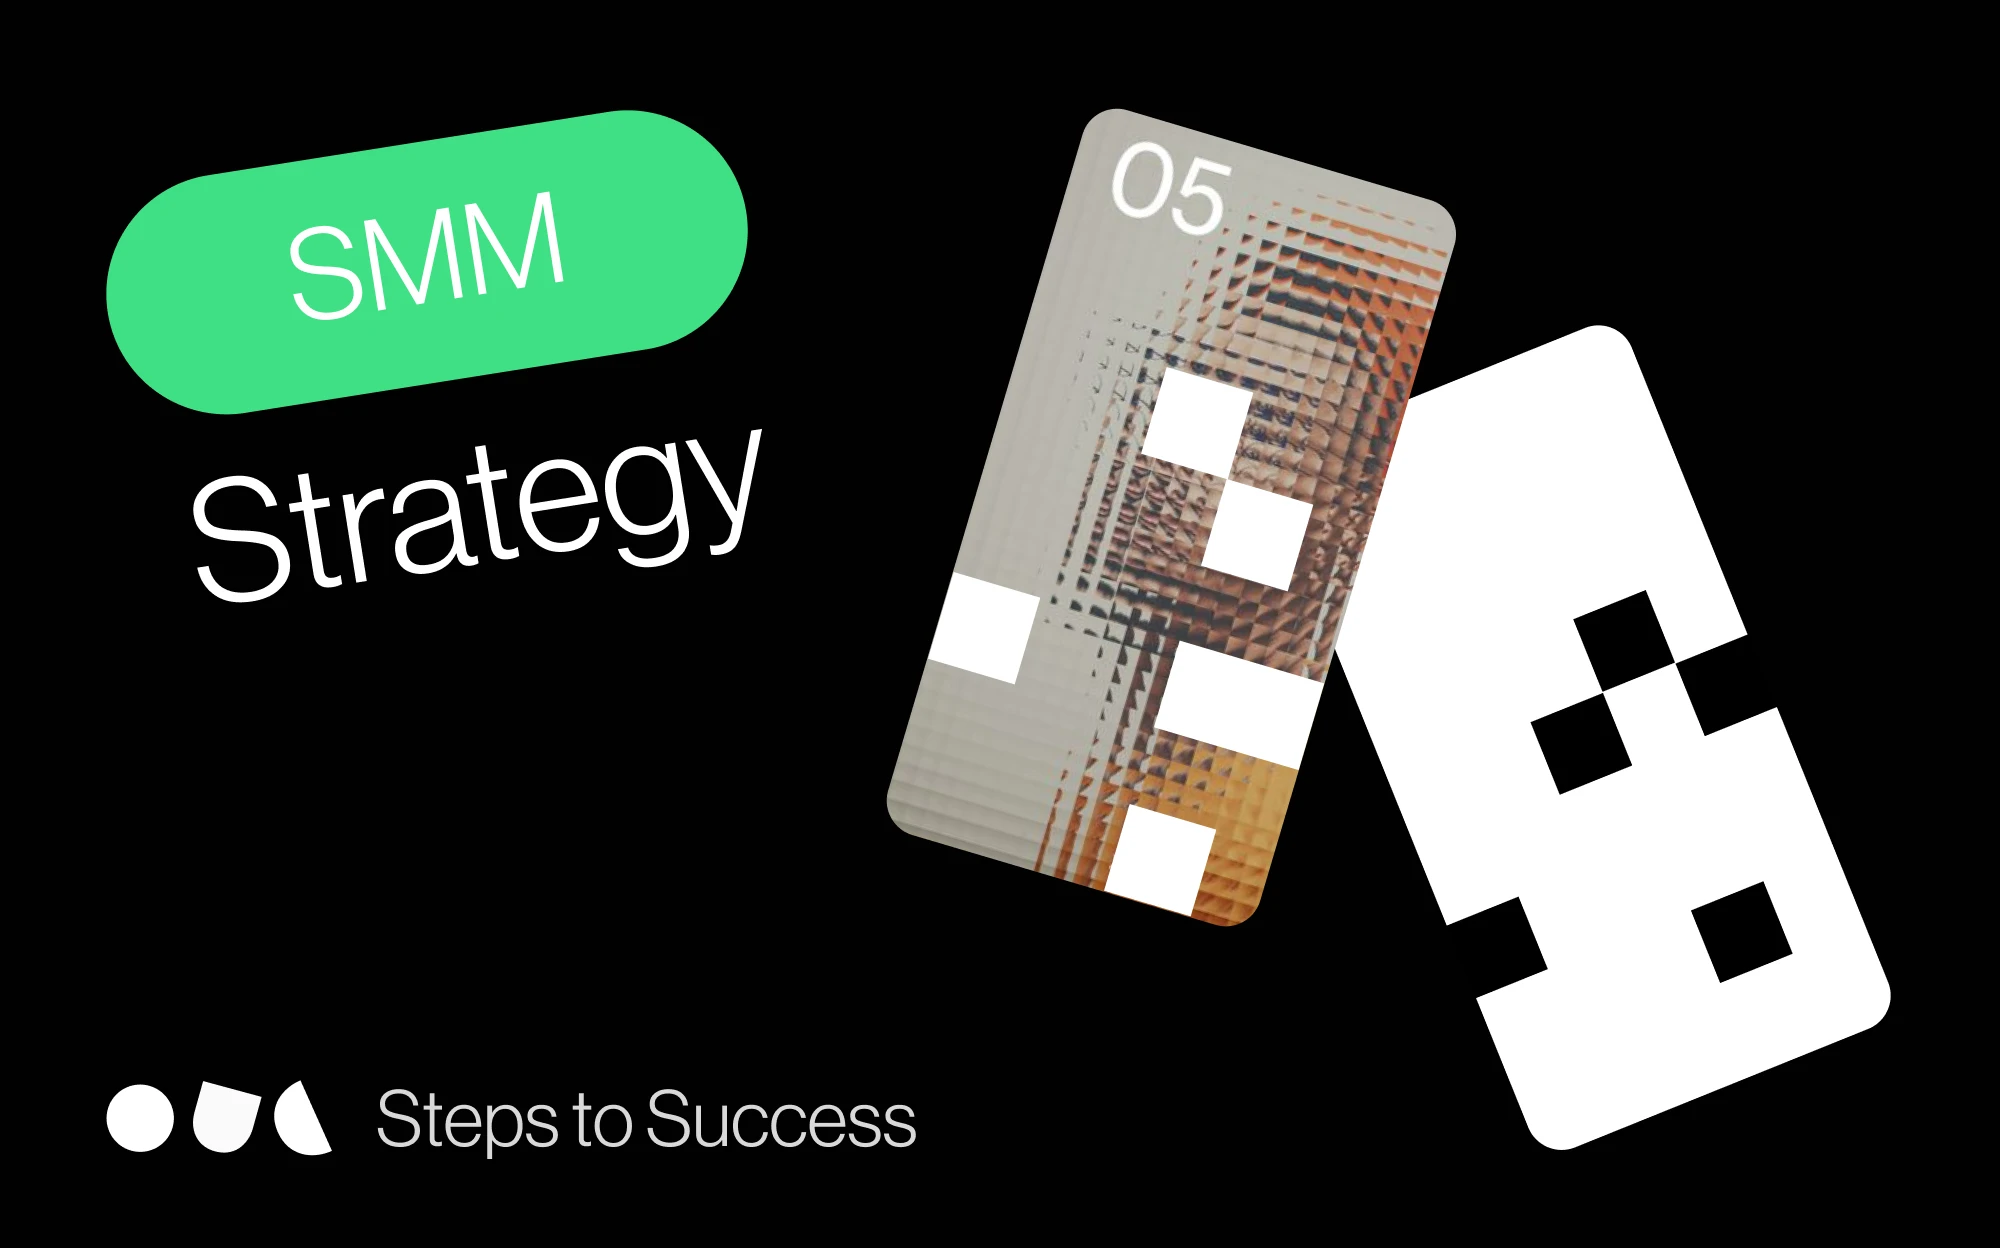 How to Create a Social Media Marketing Strategy in 5 Easy Steps